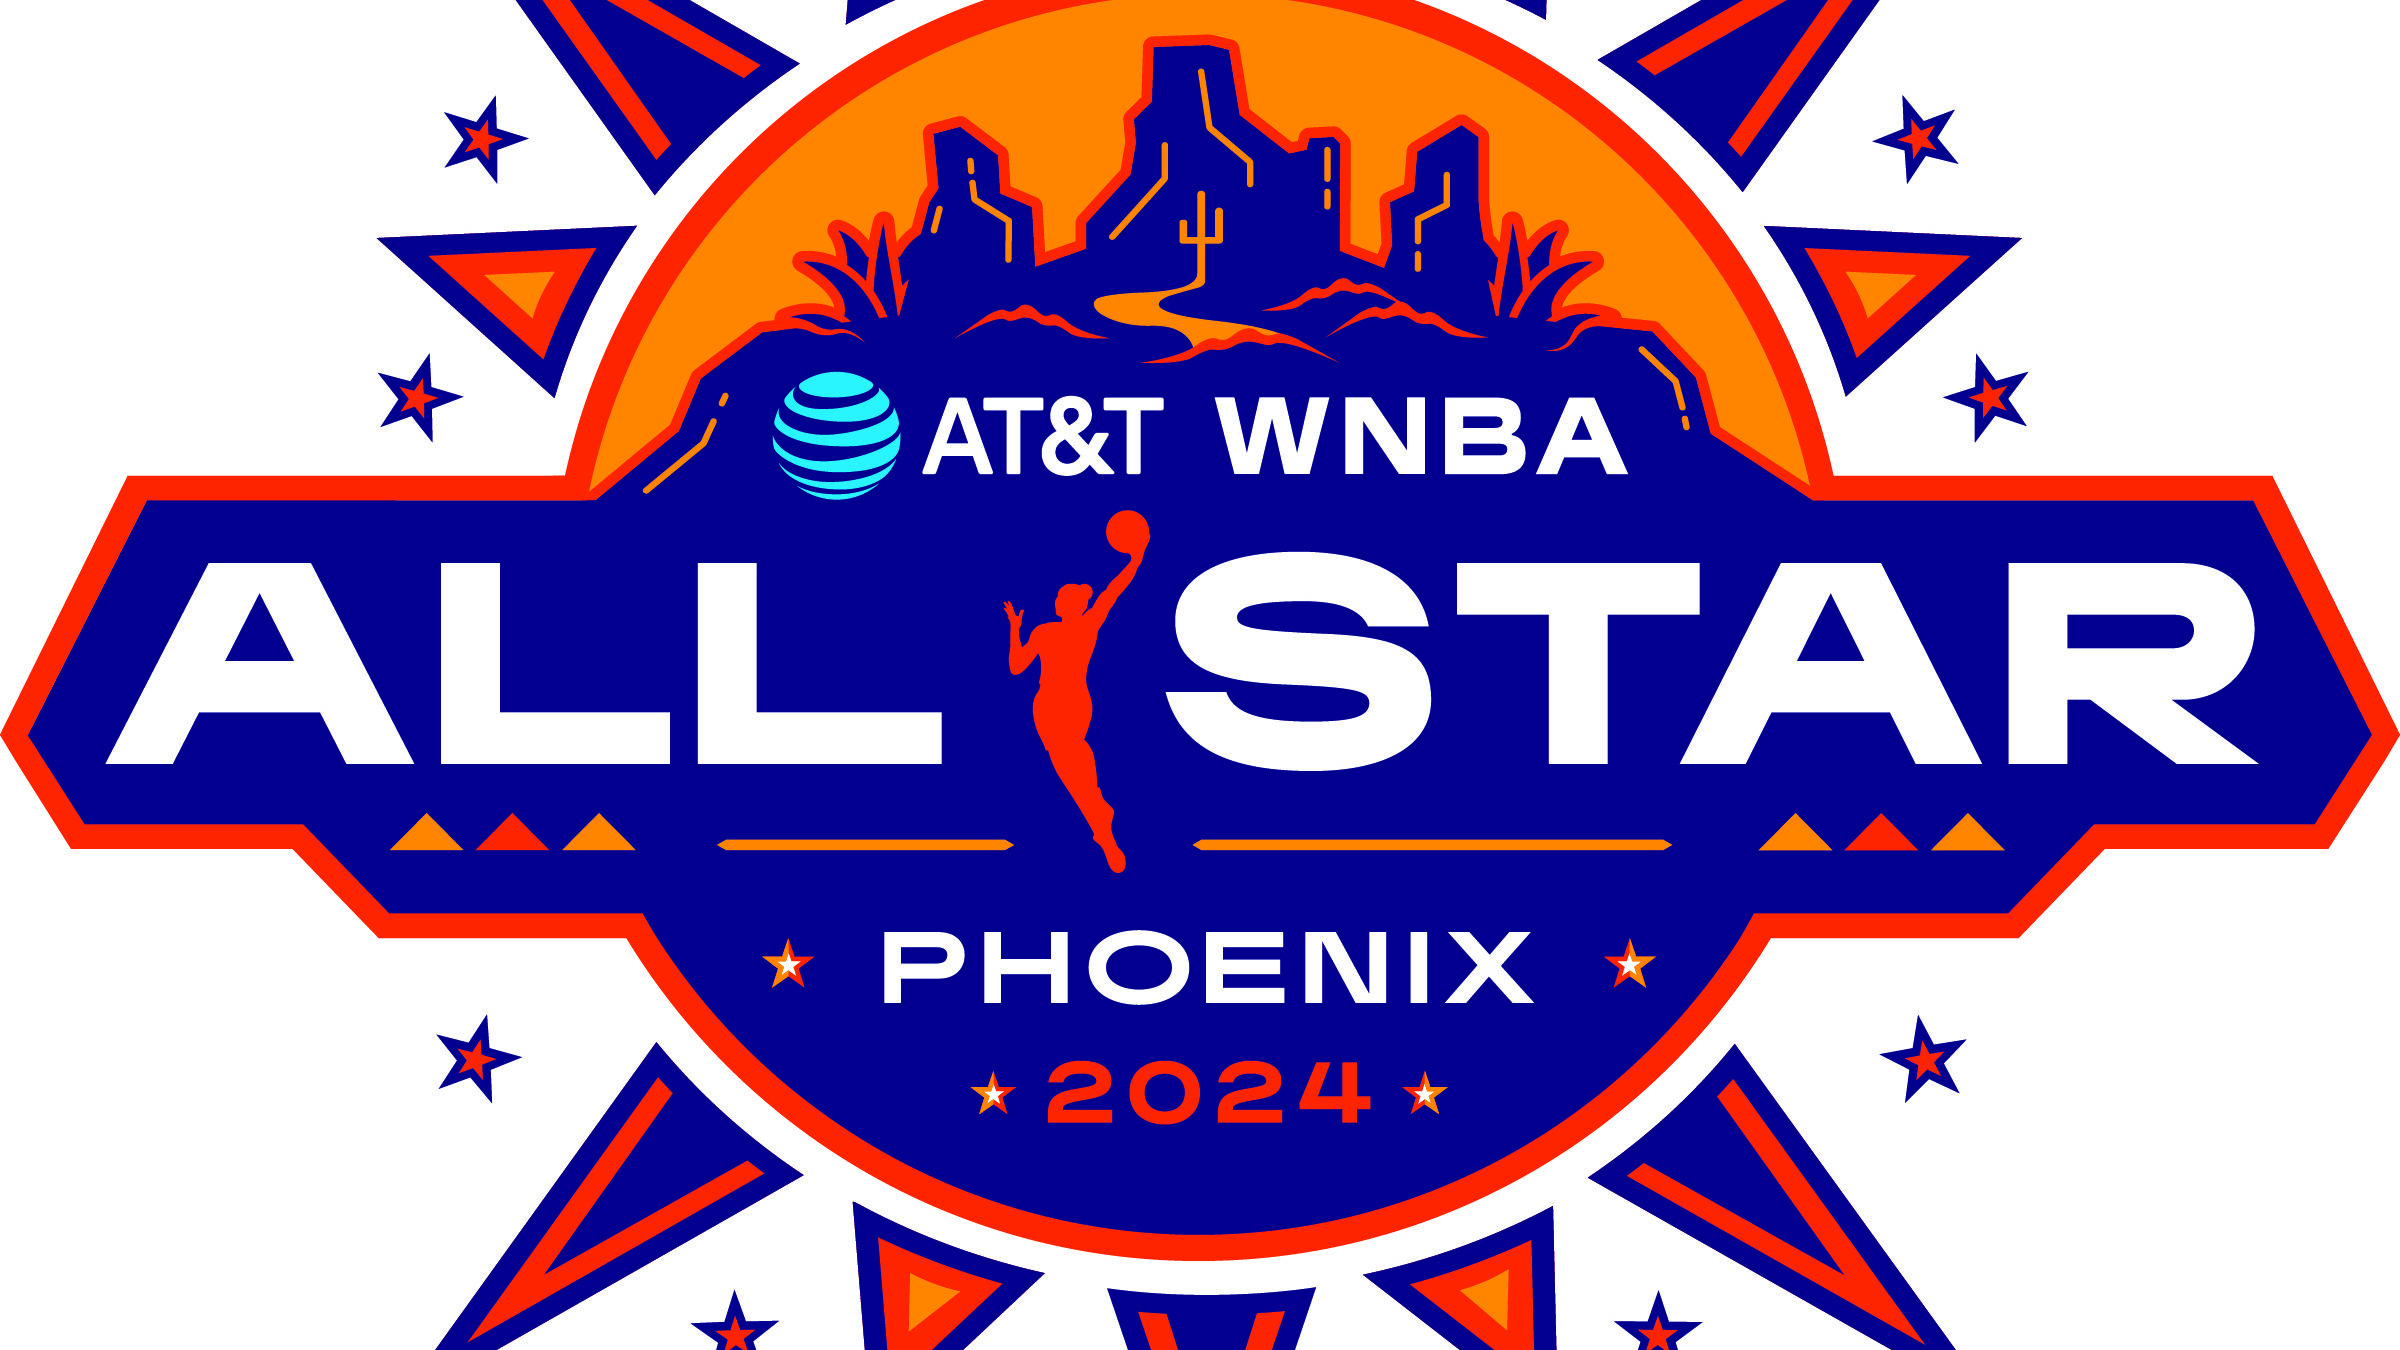 The Phoenix Mercury will host the 2024 WNBA All-Star Game at Footprint Center on Saturday, July 20....